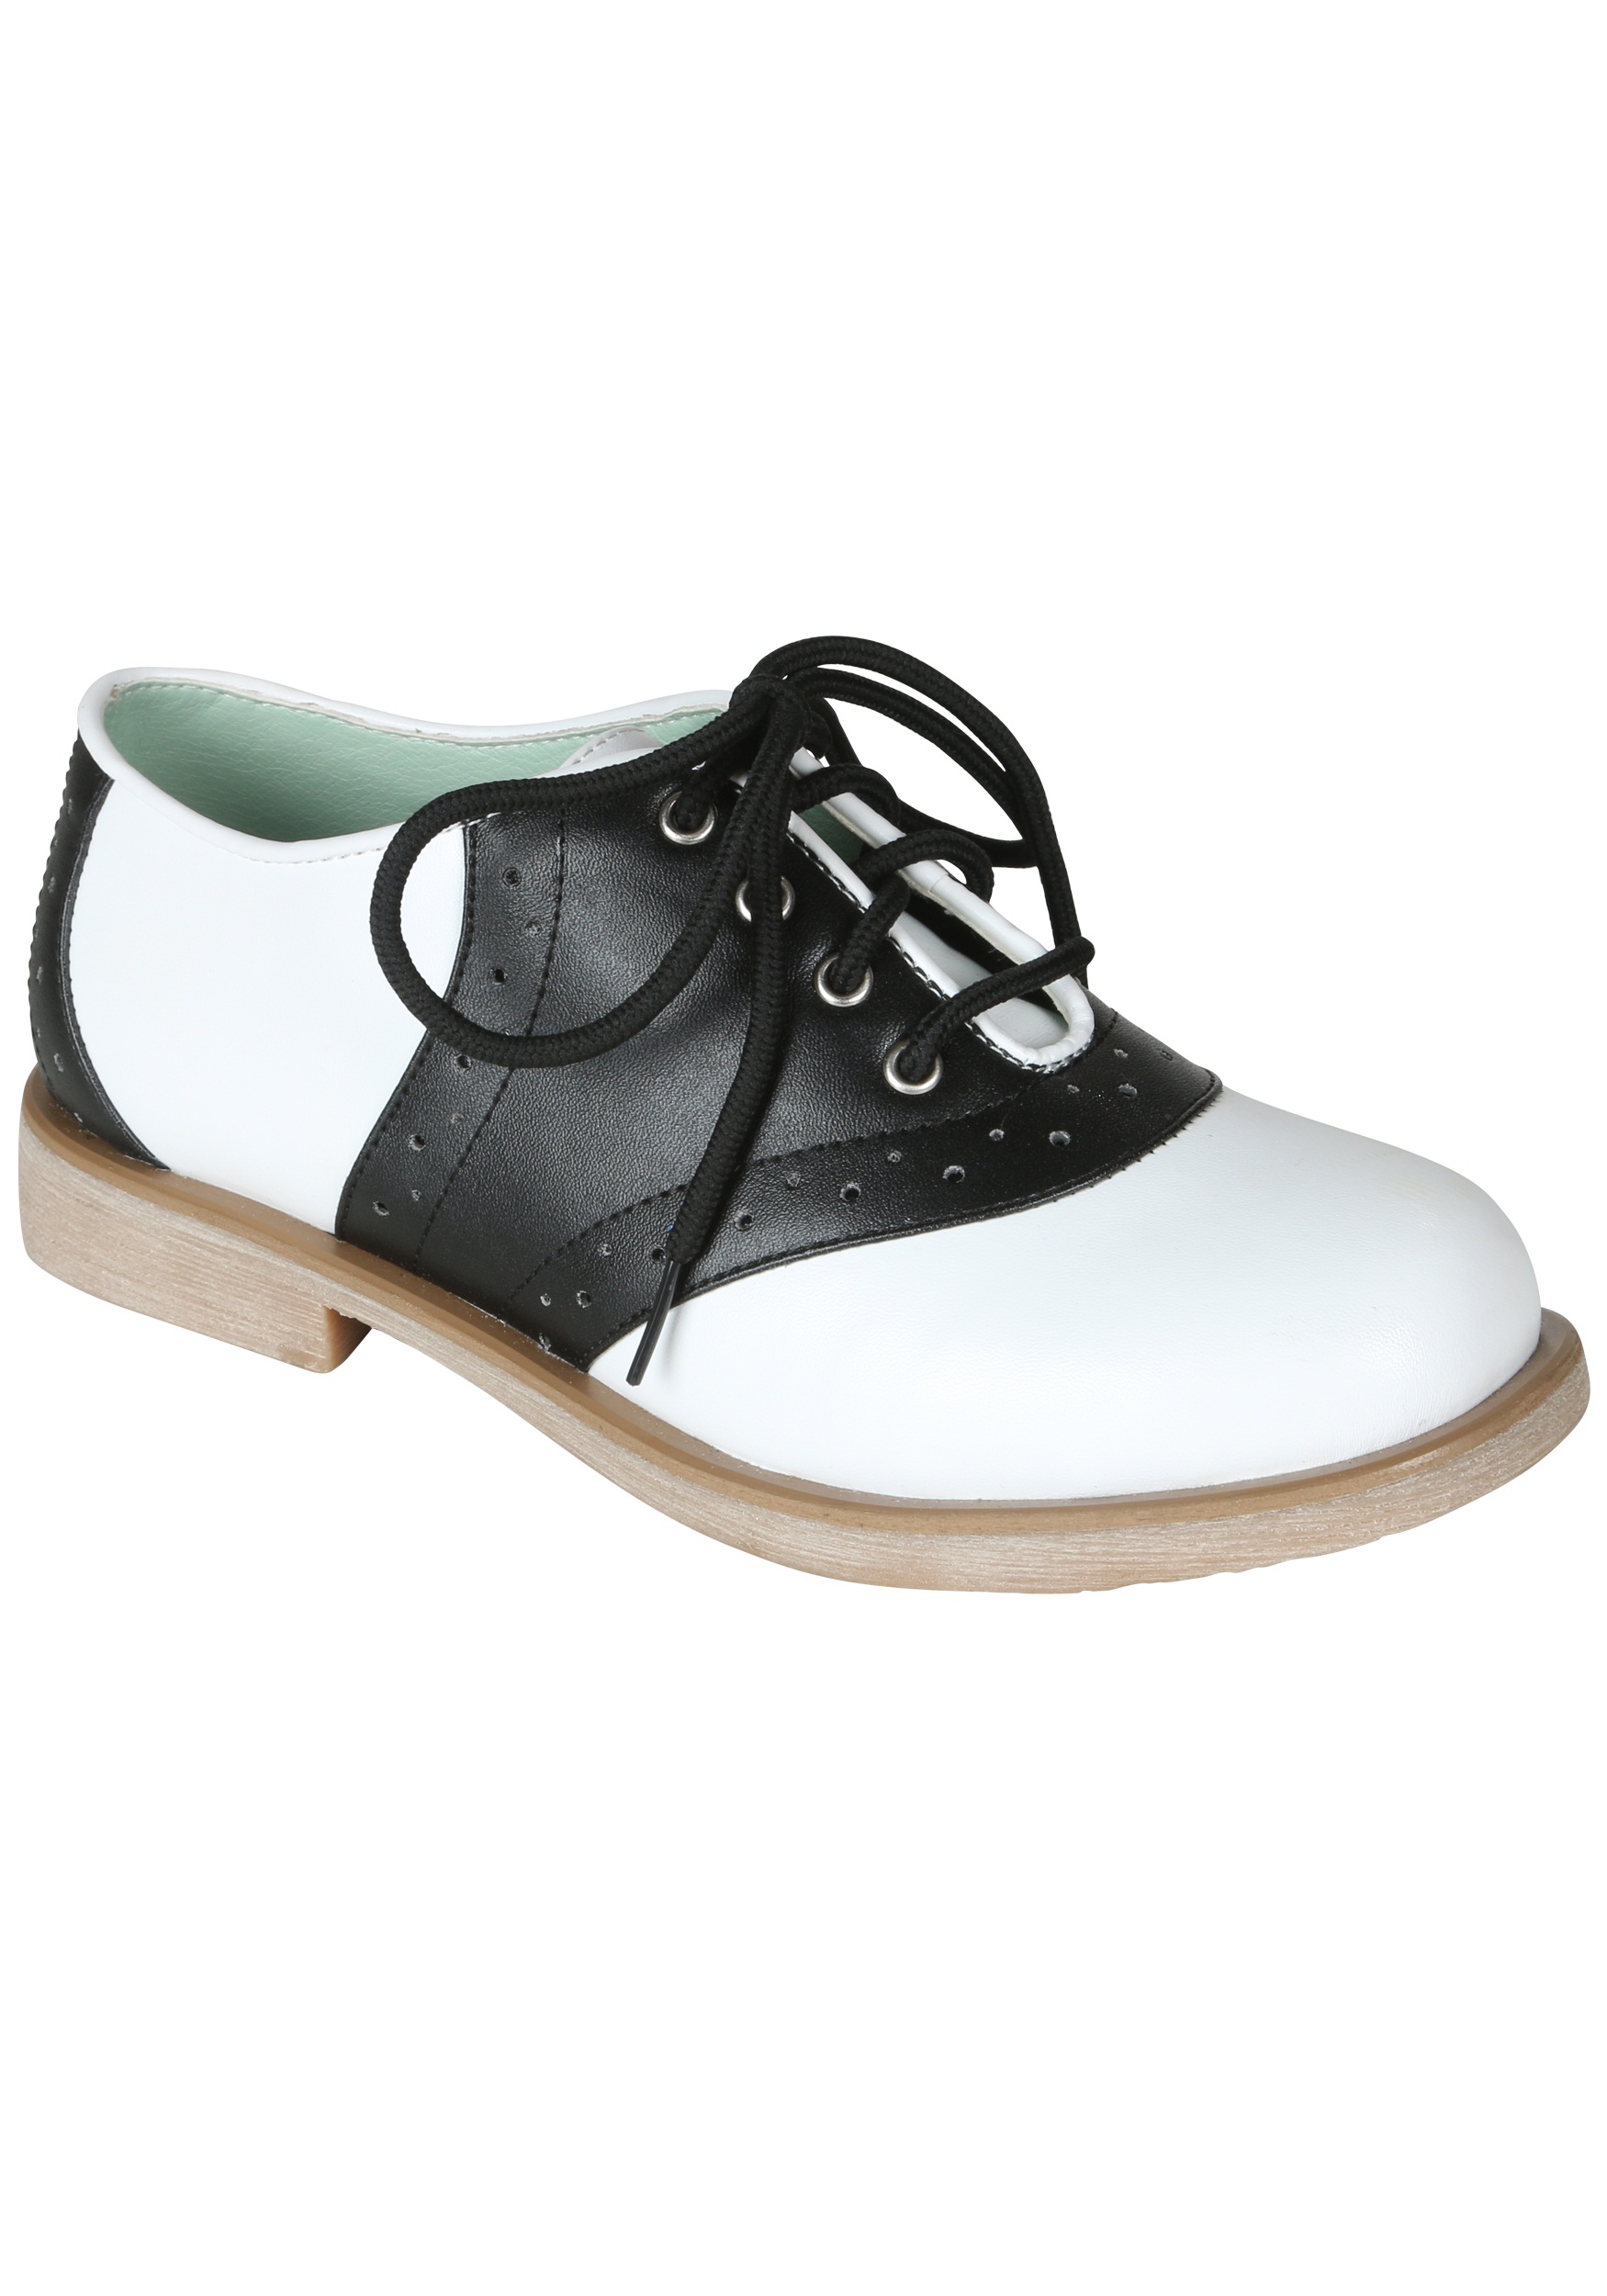 ... kids saddle shoes! They are just the right accessory for her 1950s